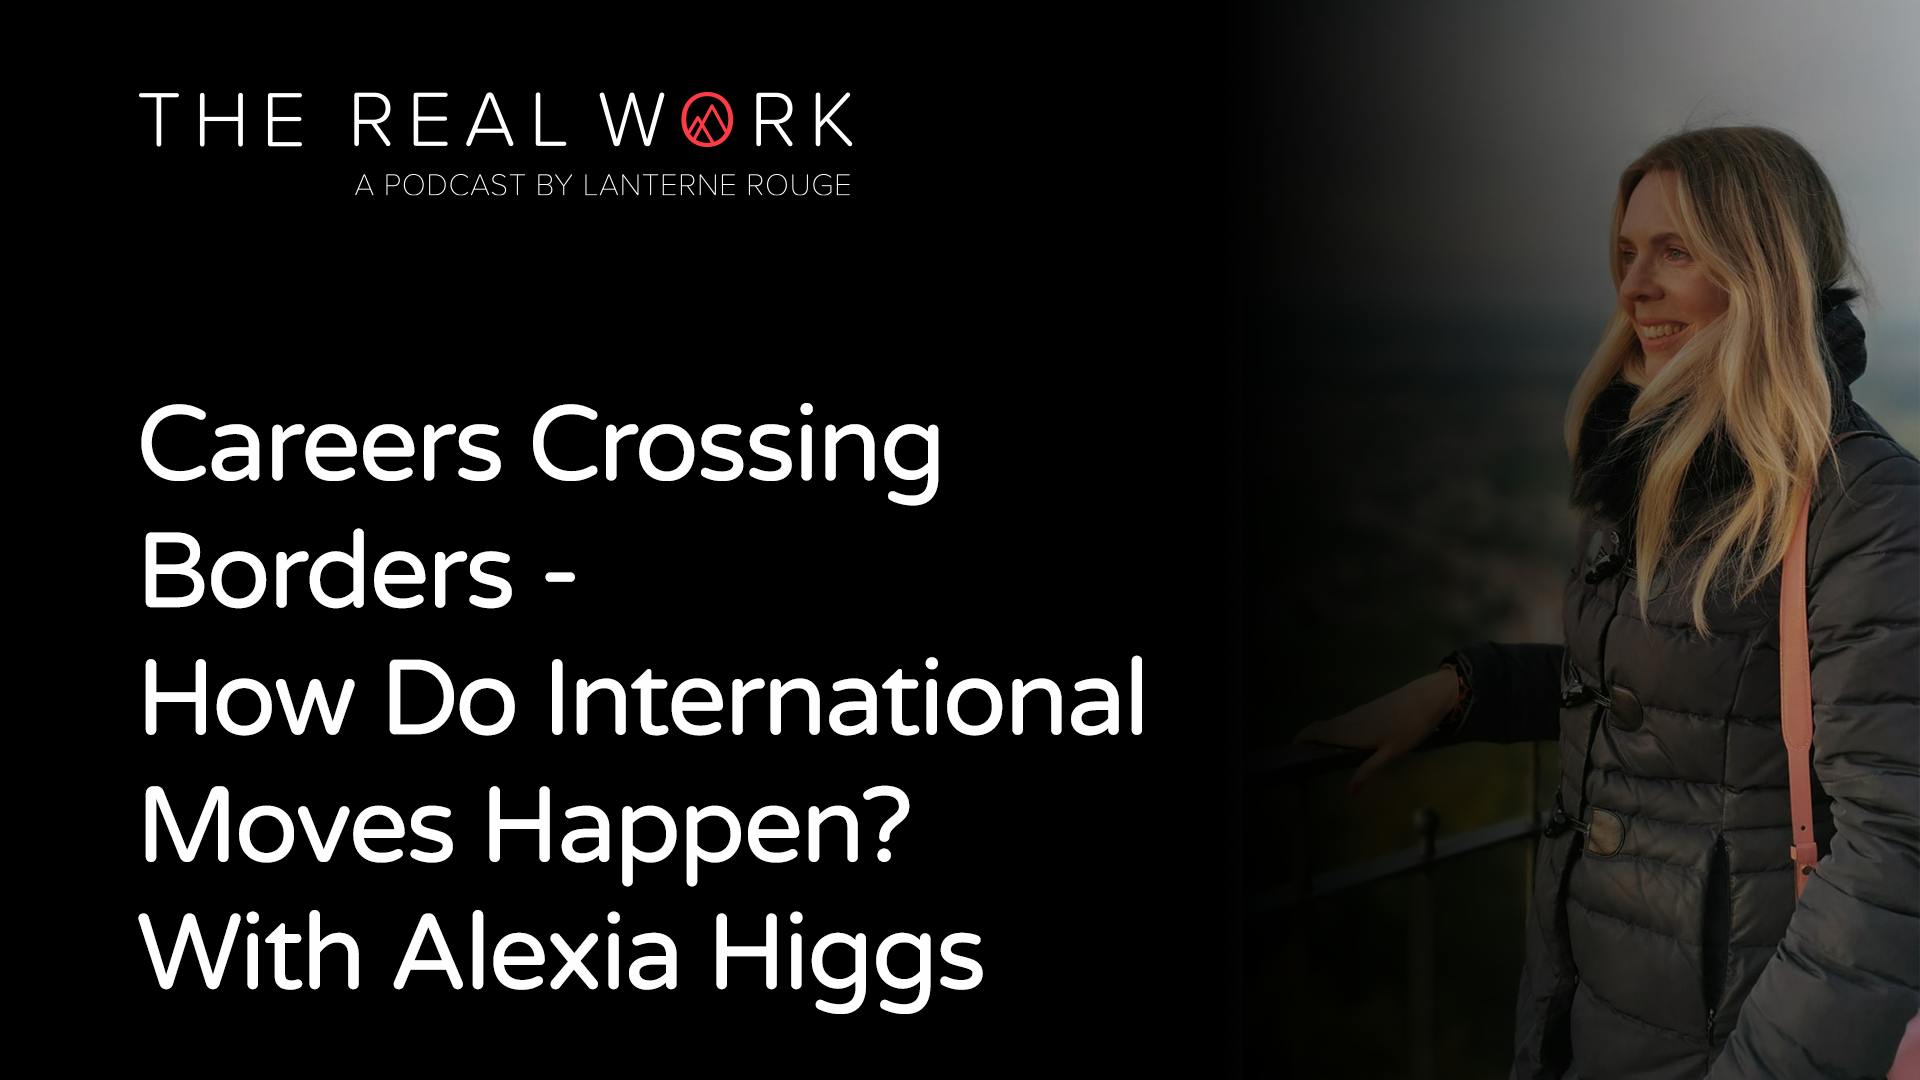 Alexia Higgs talks about moving internationally with your career. 